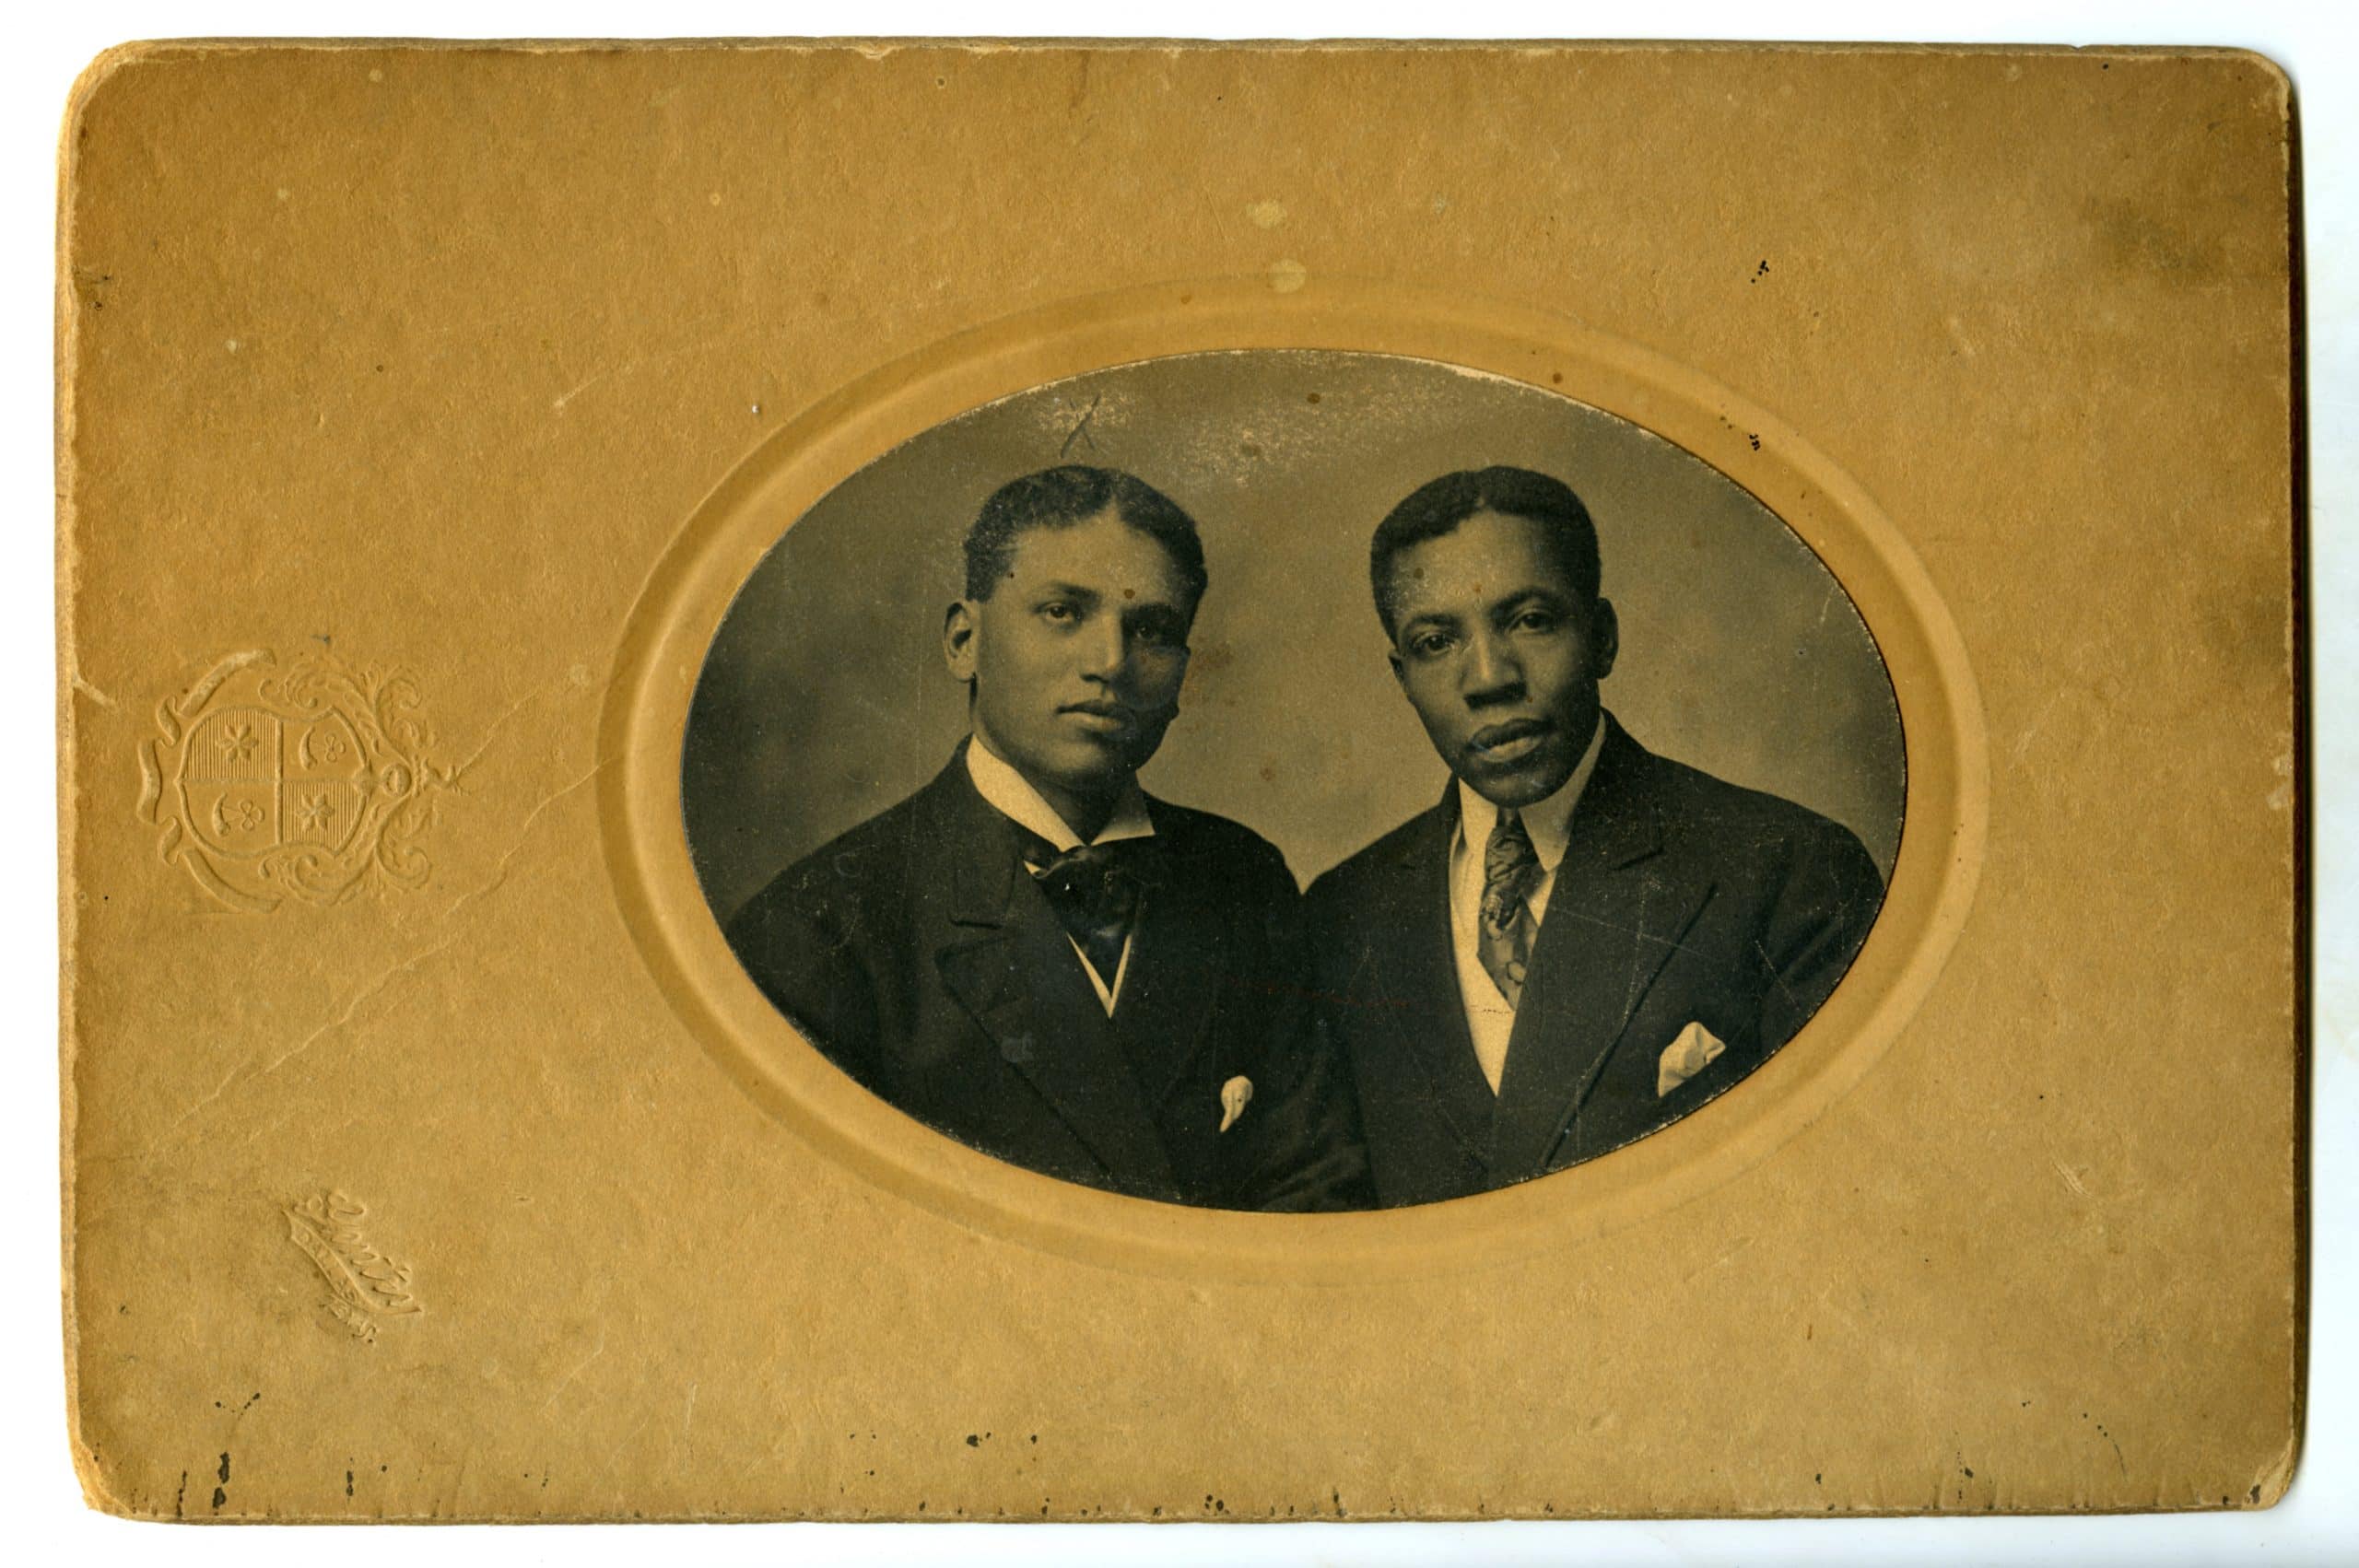 Historic image of Oval portrait of two men in suits